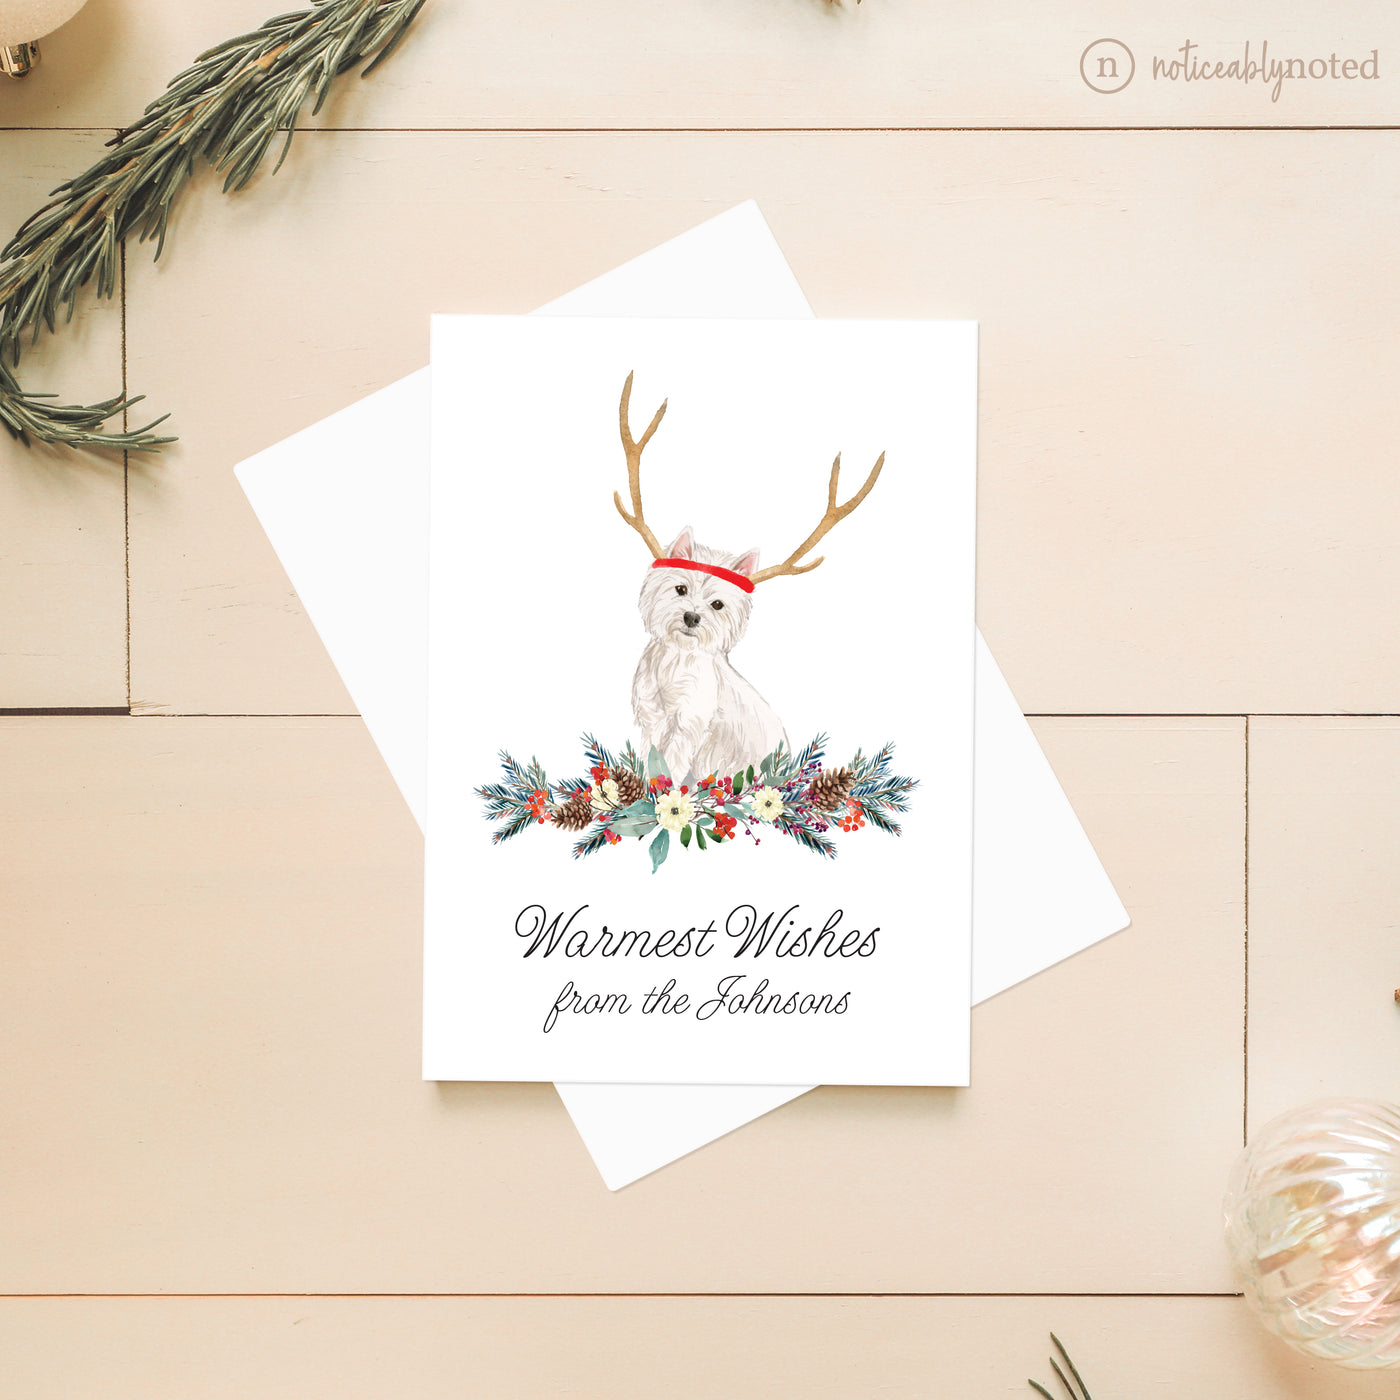 Westie Christmas Cards | Noticeably Noted